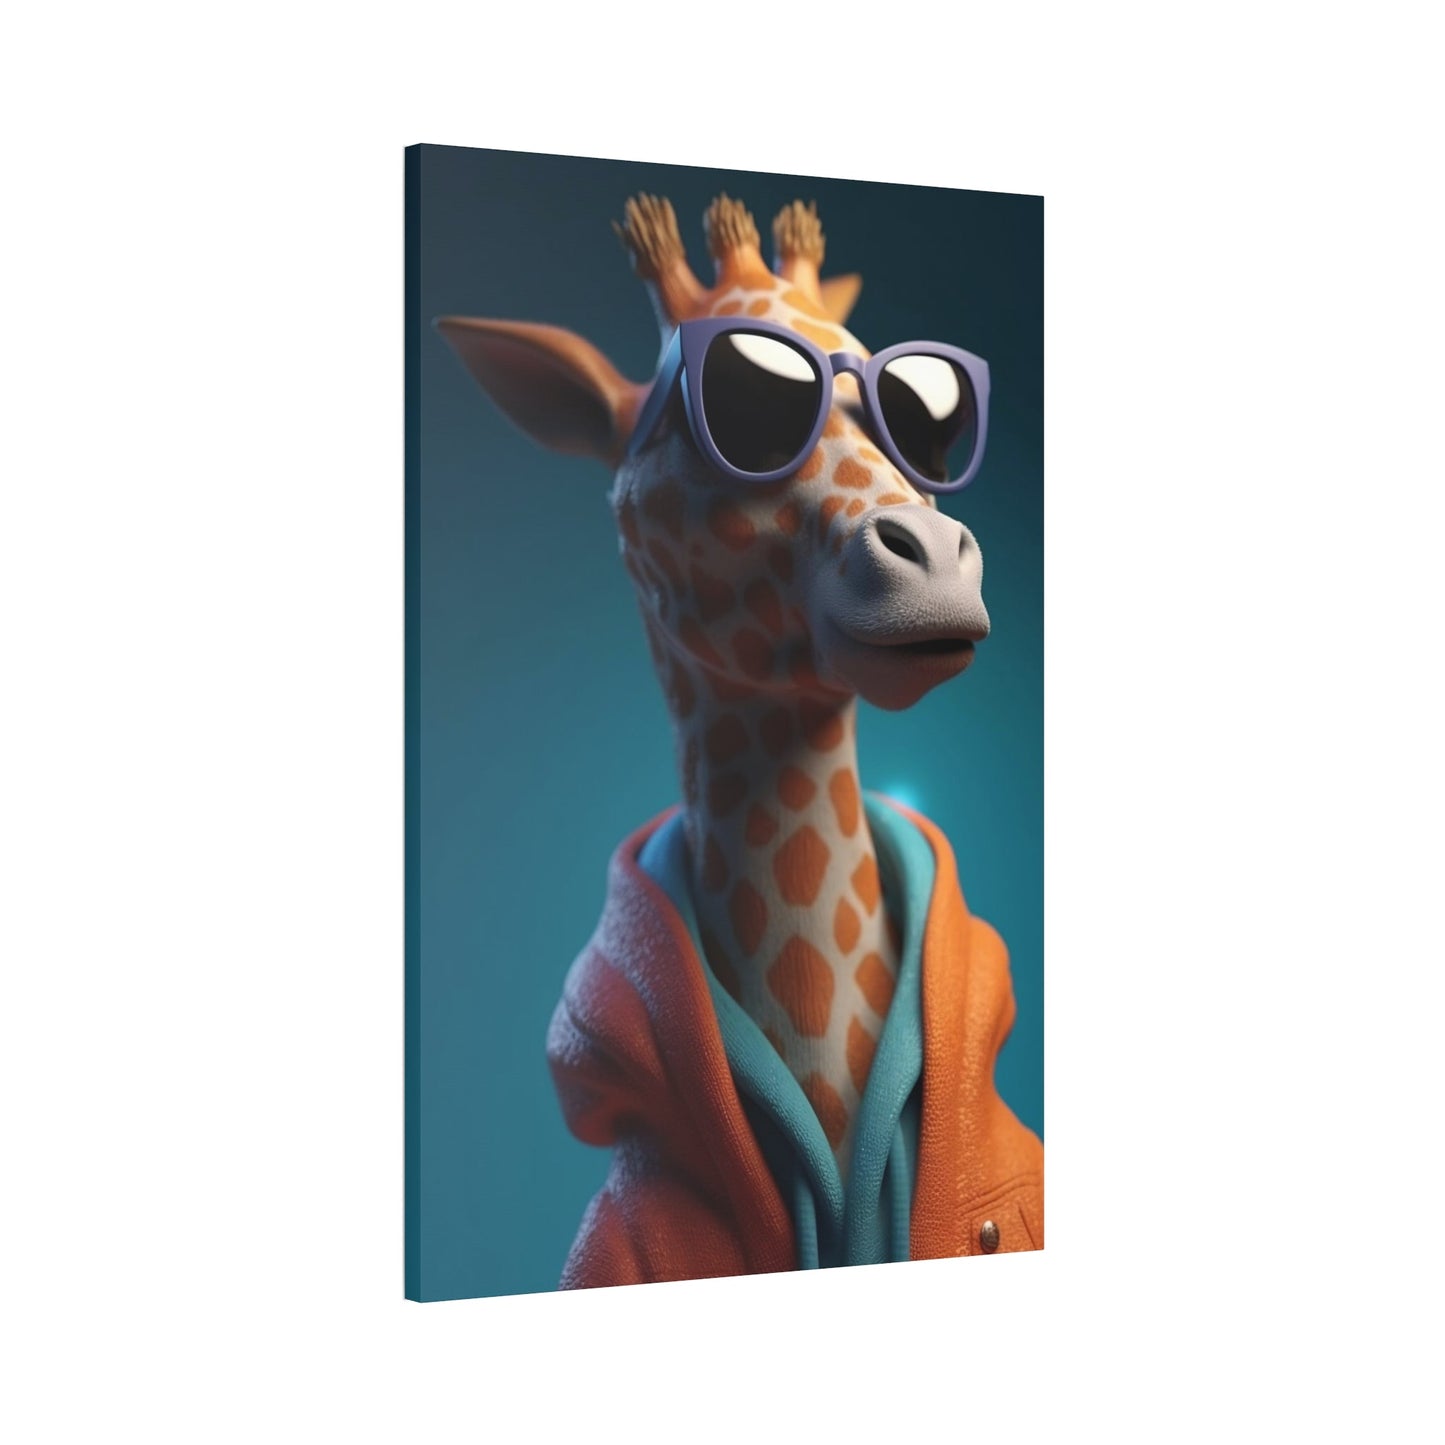 The Art of Observation: A Stunning Artistic Rendering of a Giraffe in Profile on Canvas & Poster